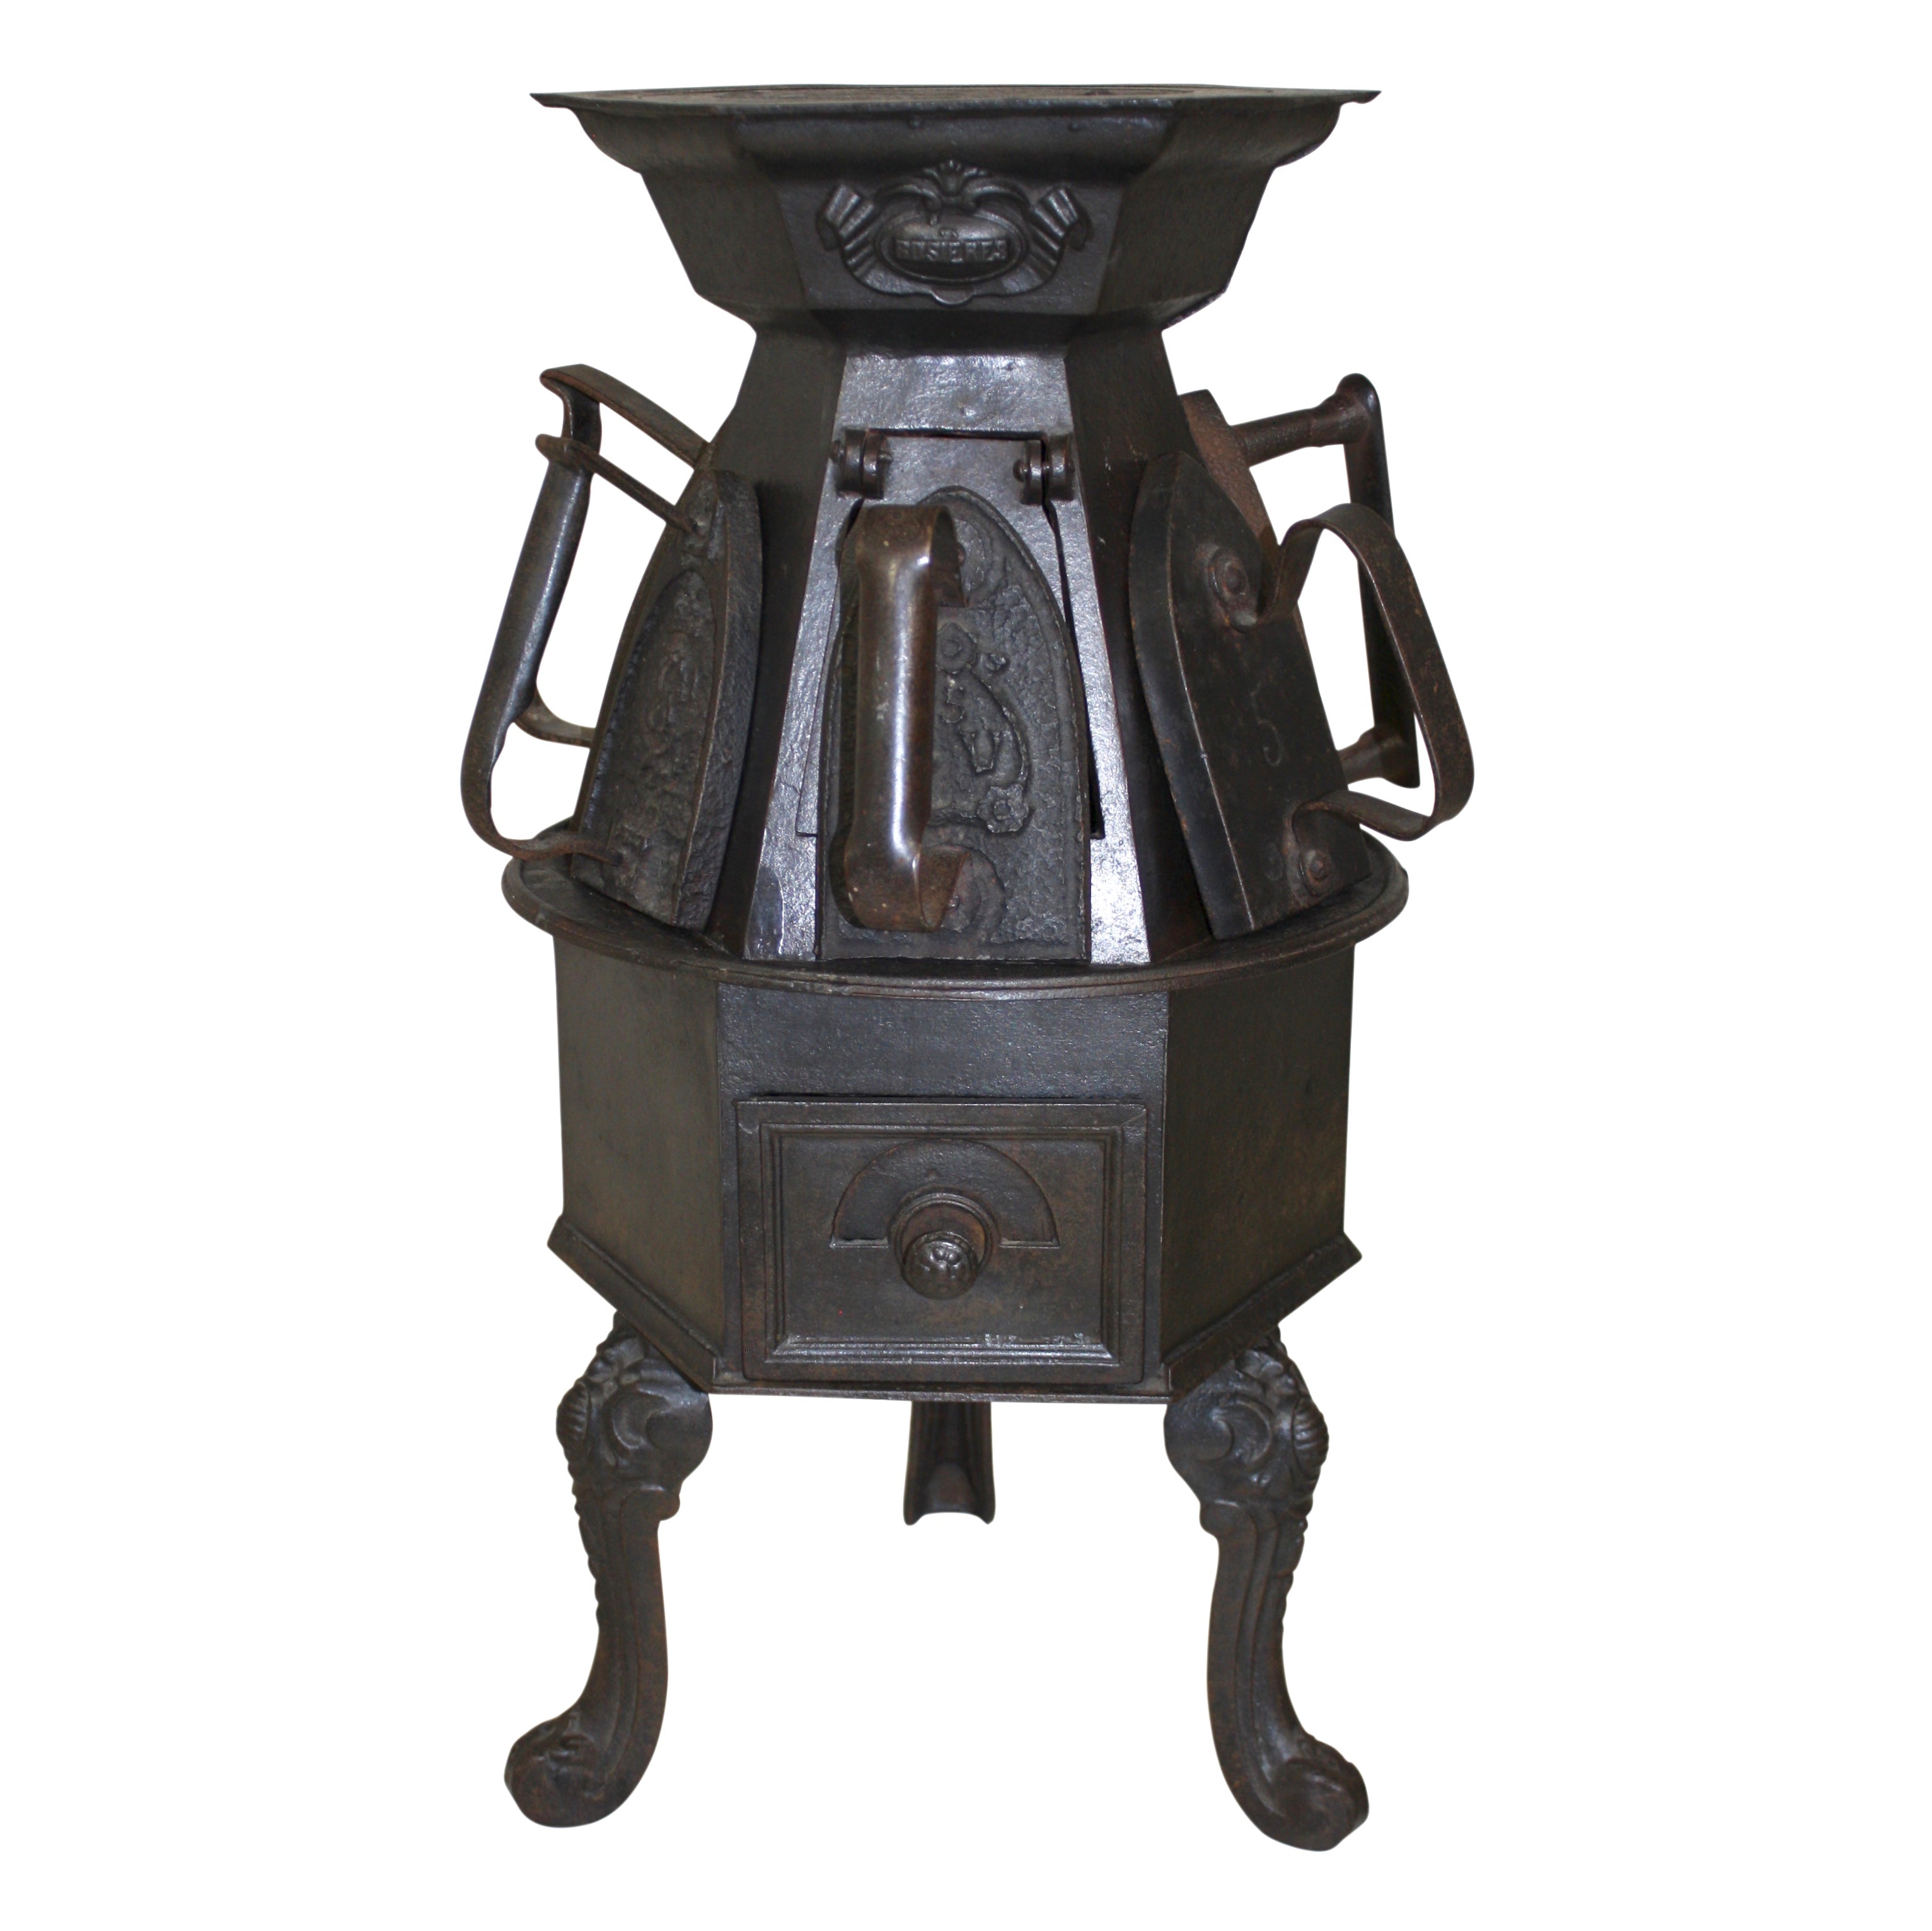 French Rosières Laundry Stove with Six Irons